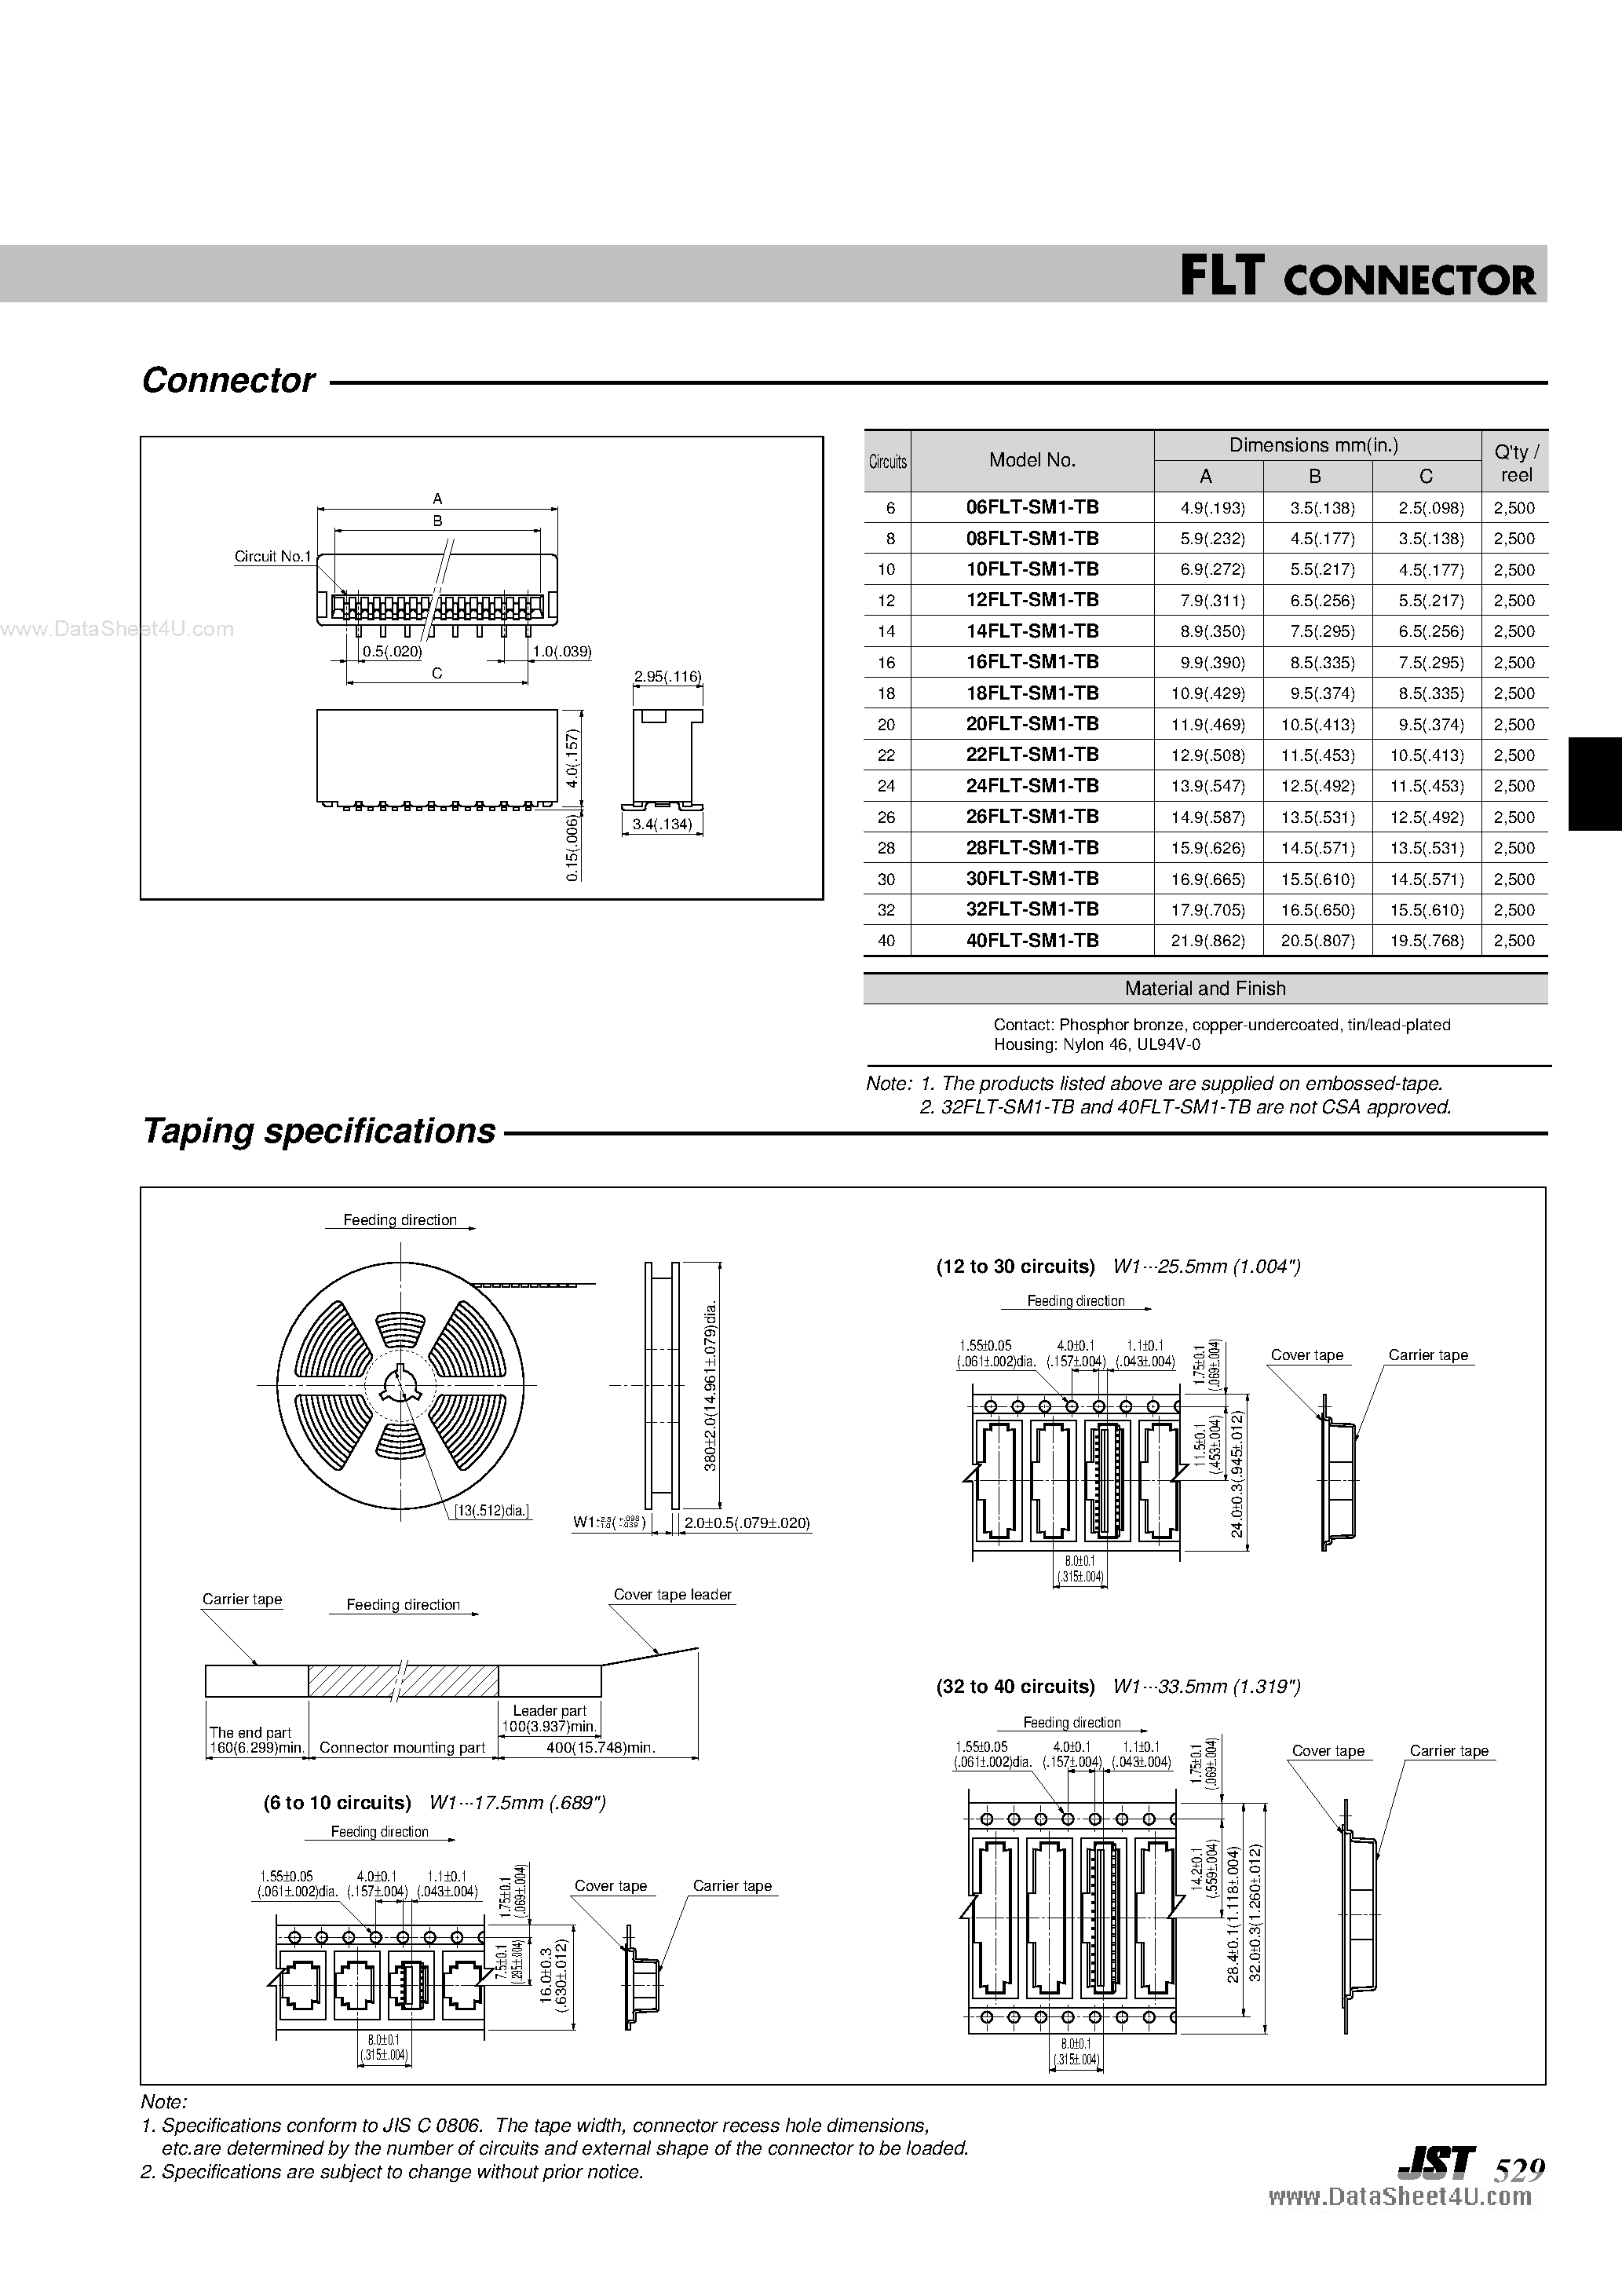 Datasheet 28FLT-SM1-TB - Connector page 2